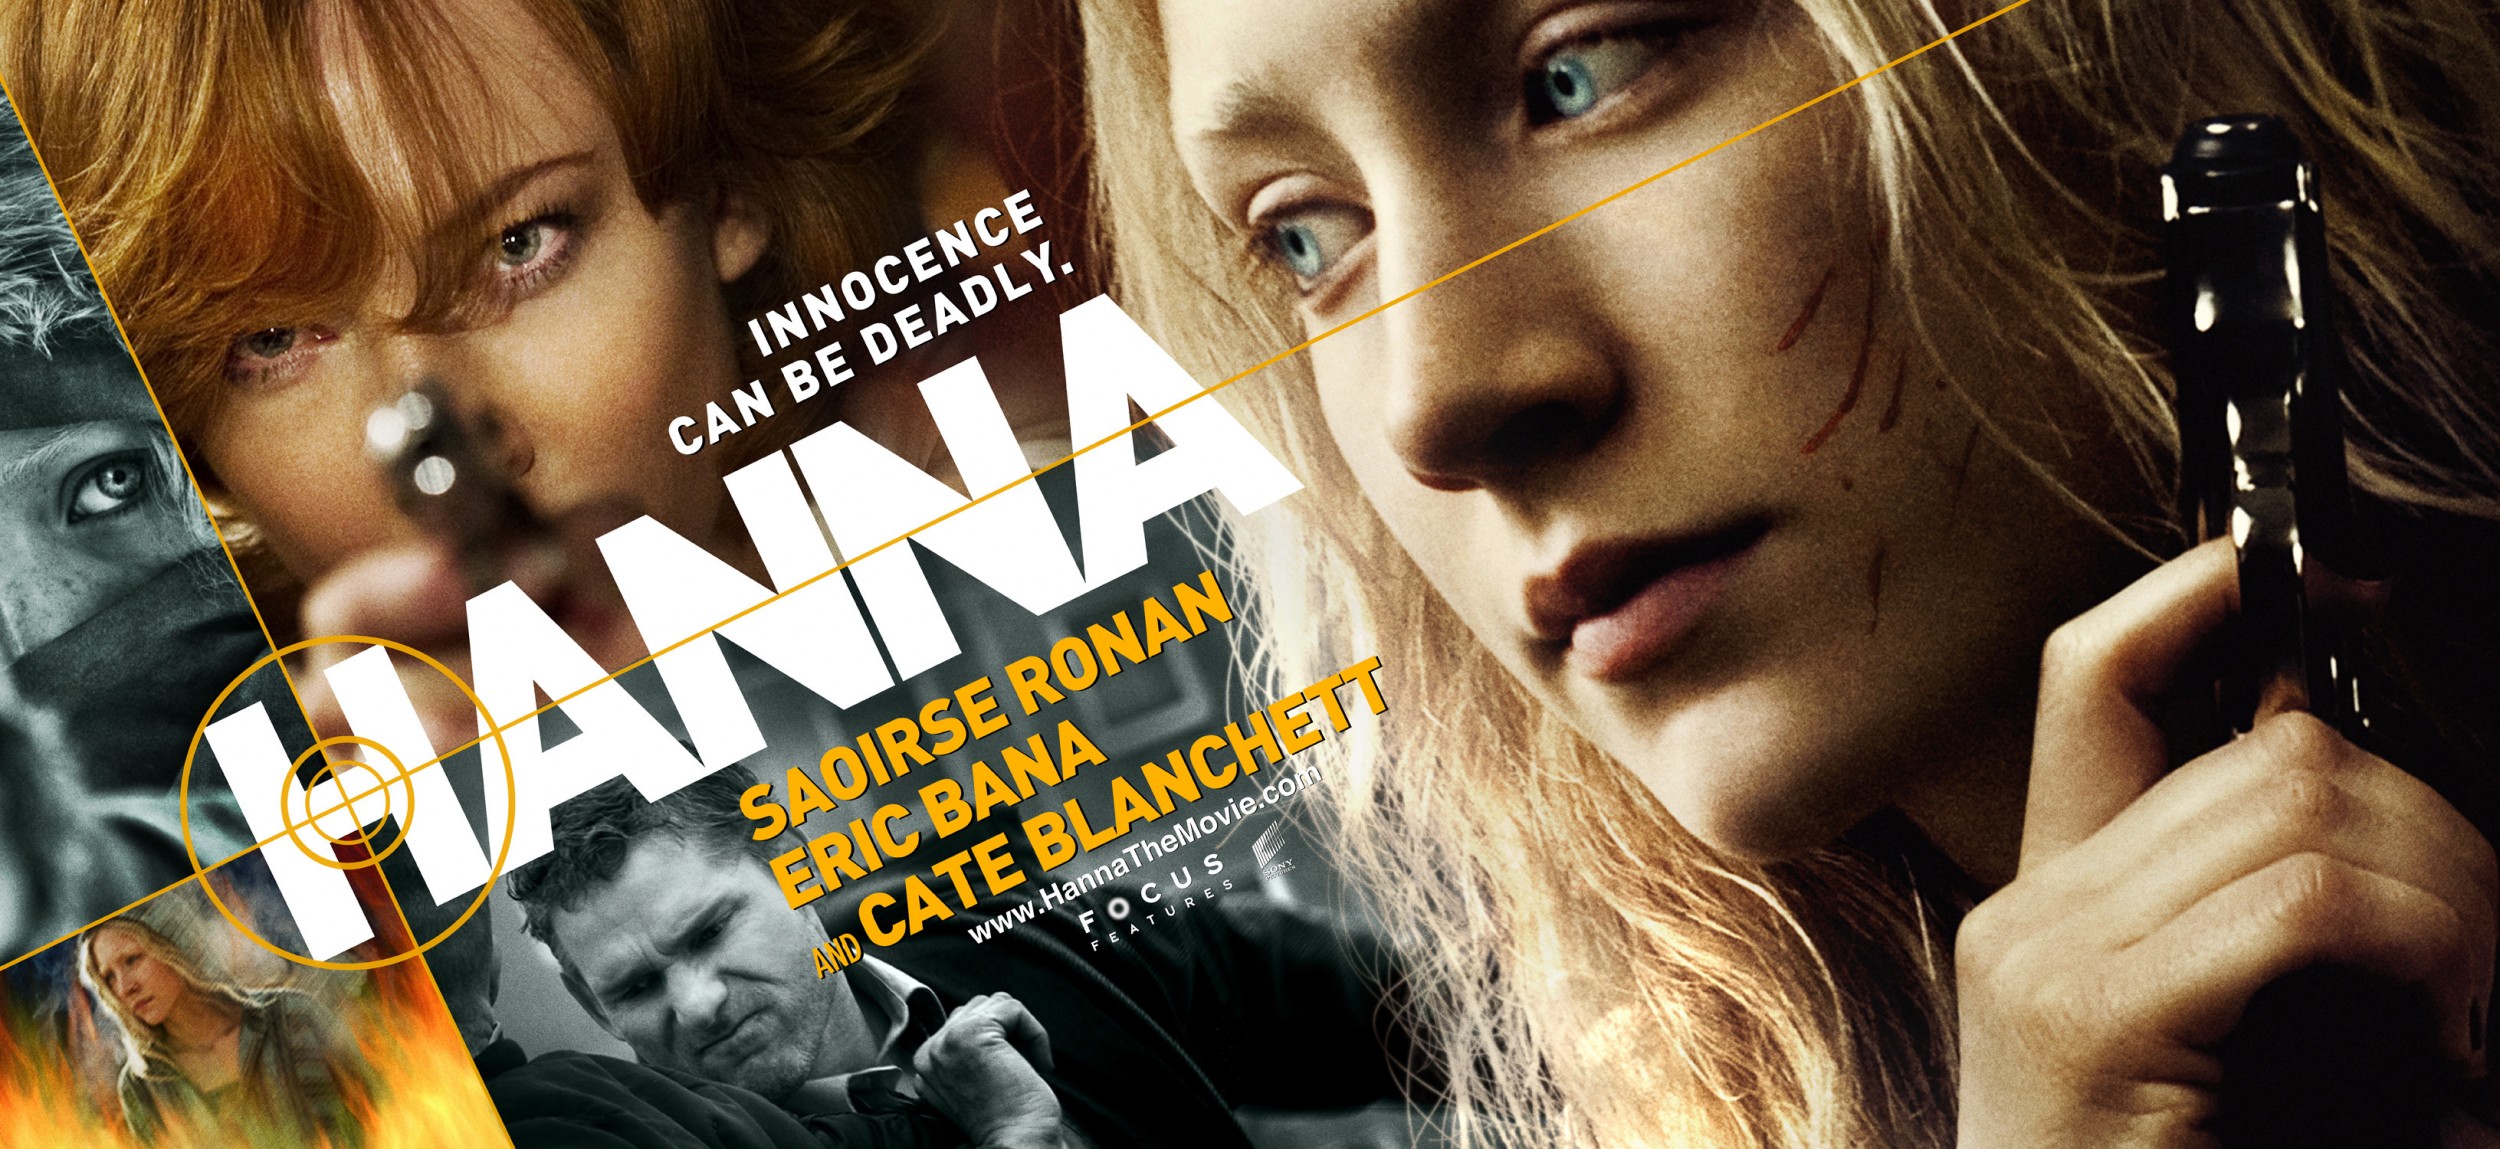 Mega Sized Movie Poster Image for Hanna (#3 of 6)